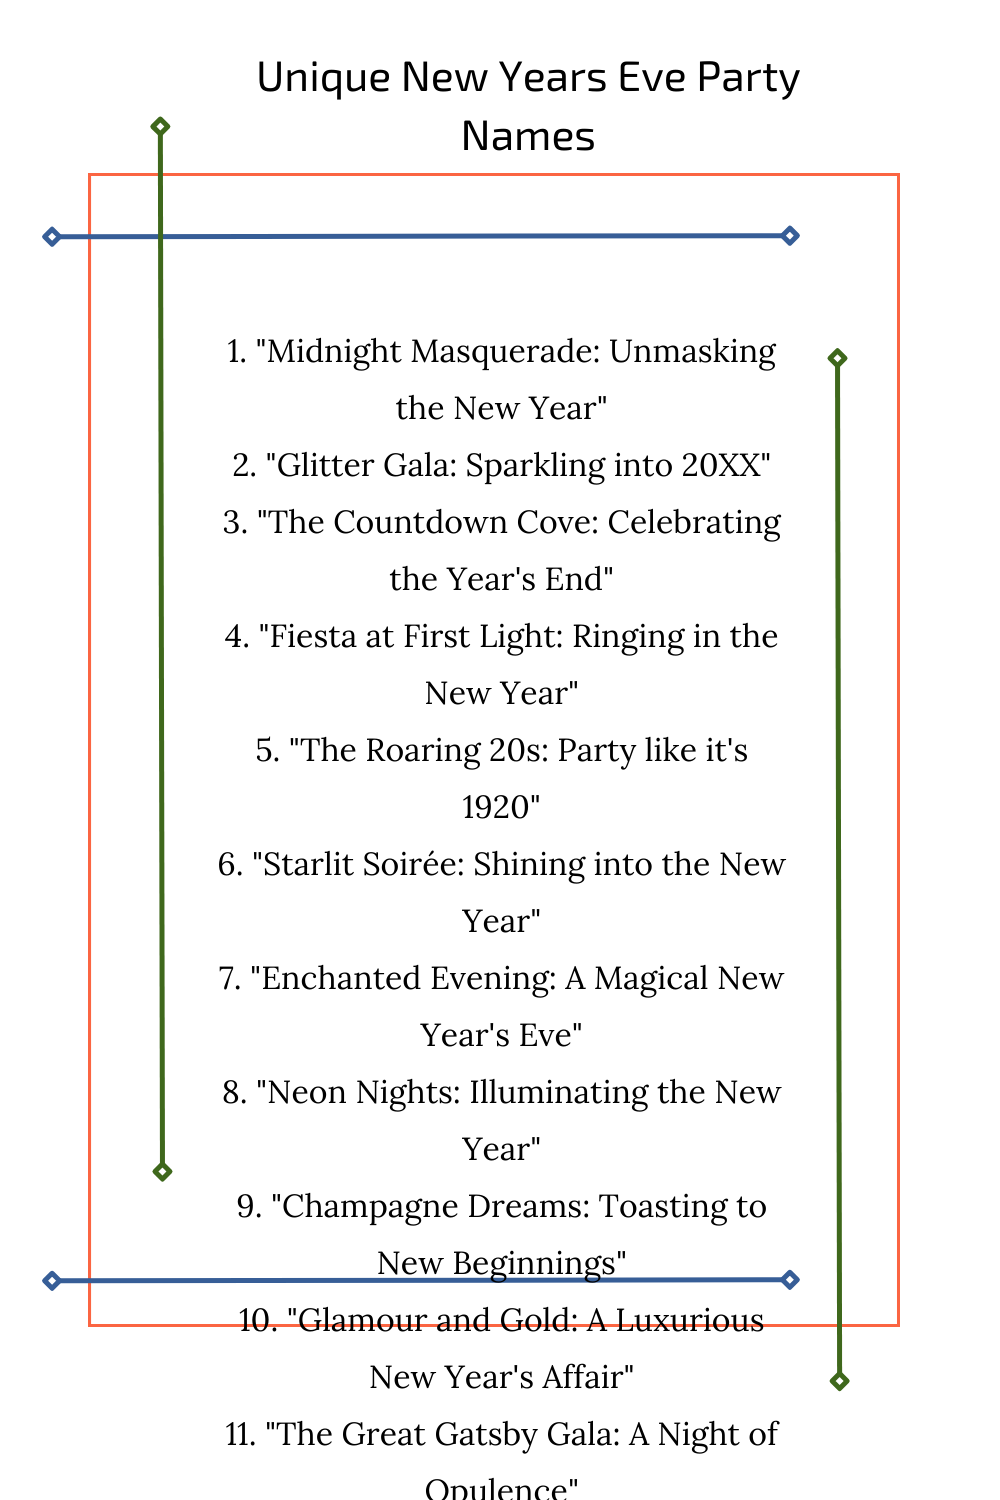 Unique New Years Eve Party Names